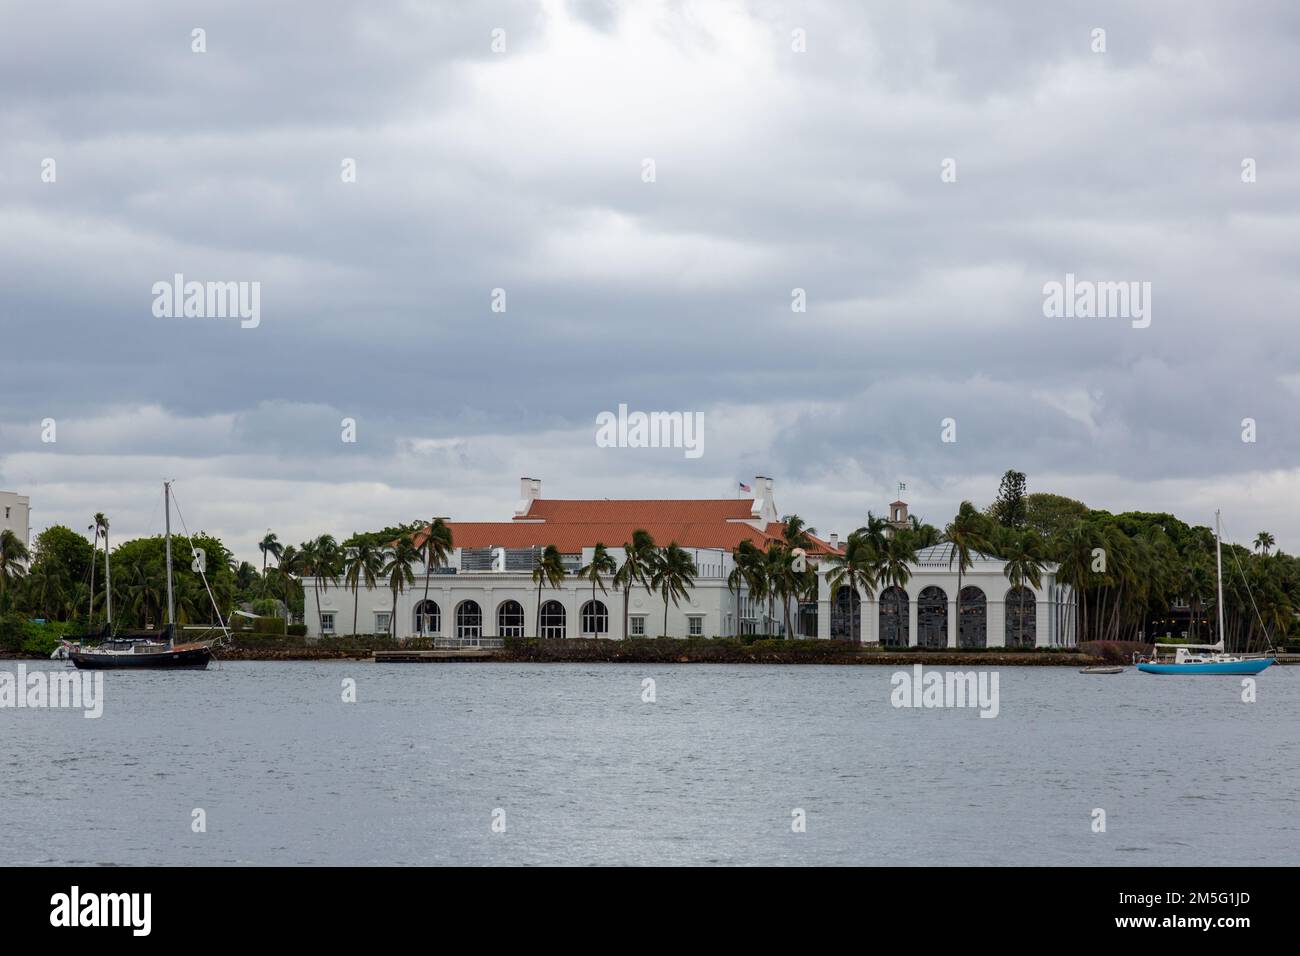 The Henry Flagler Morrison Museum and the Flagler Kenan Pavilion in Palm Beach, Florida, photographed from across the Lake Worth Lagoon. Stock Photo